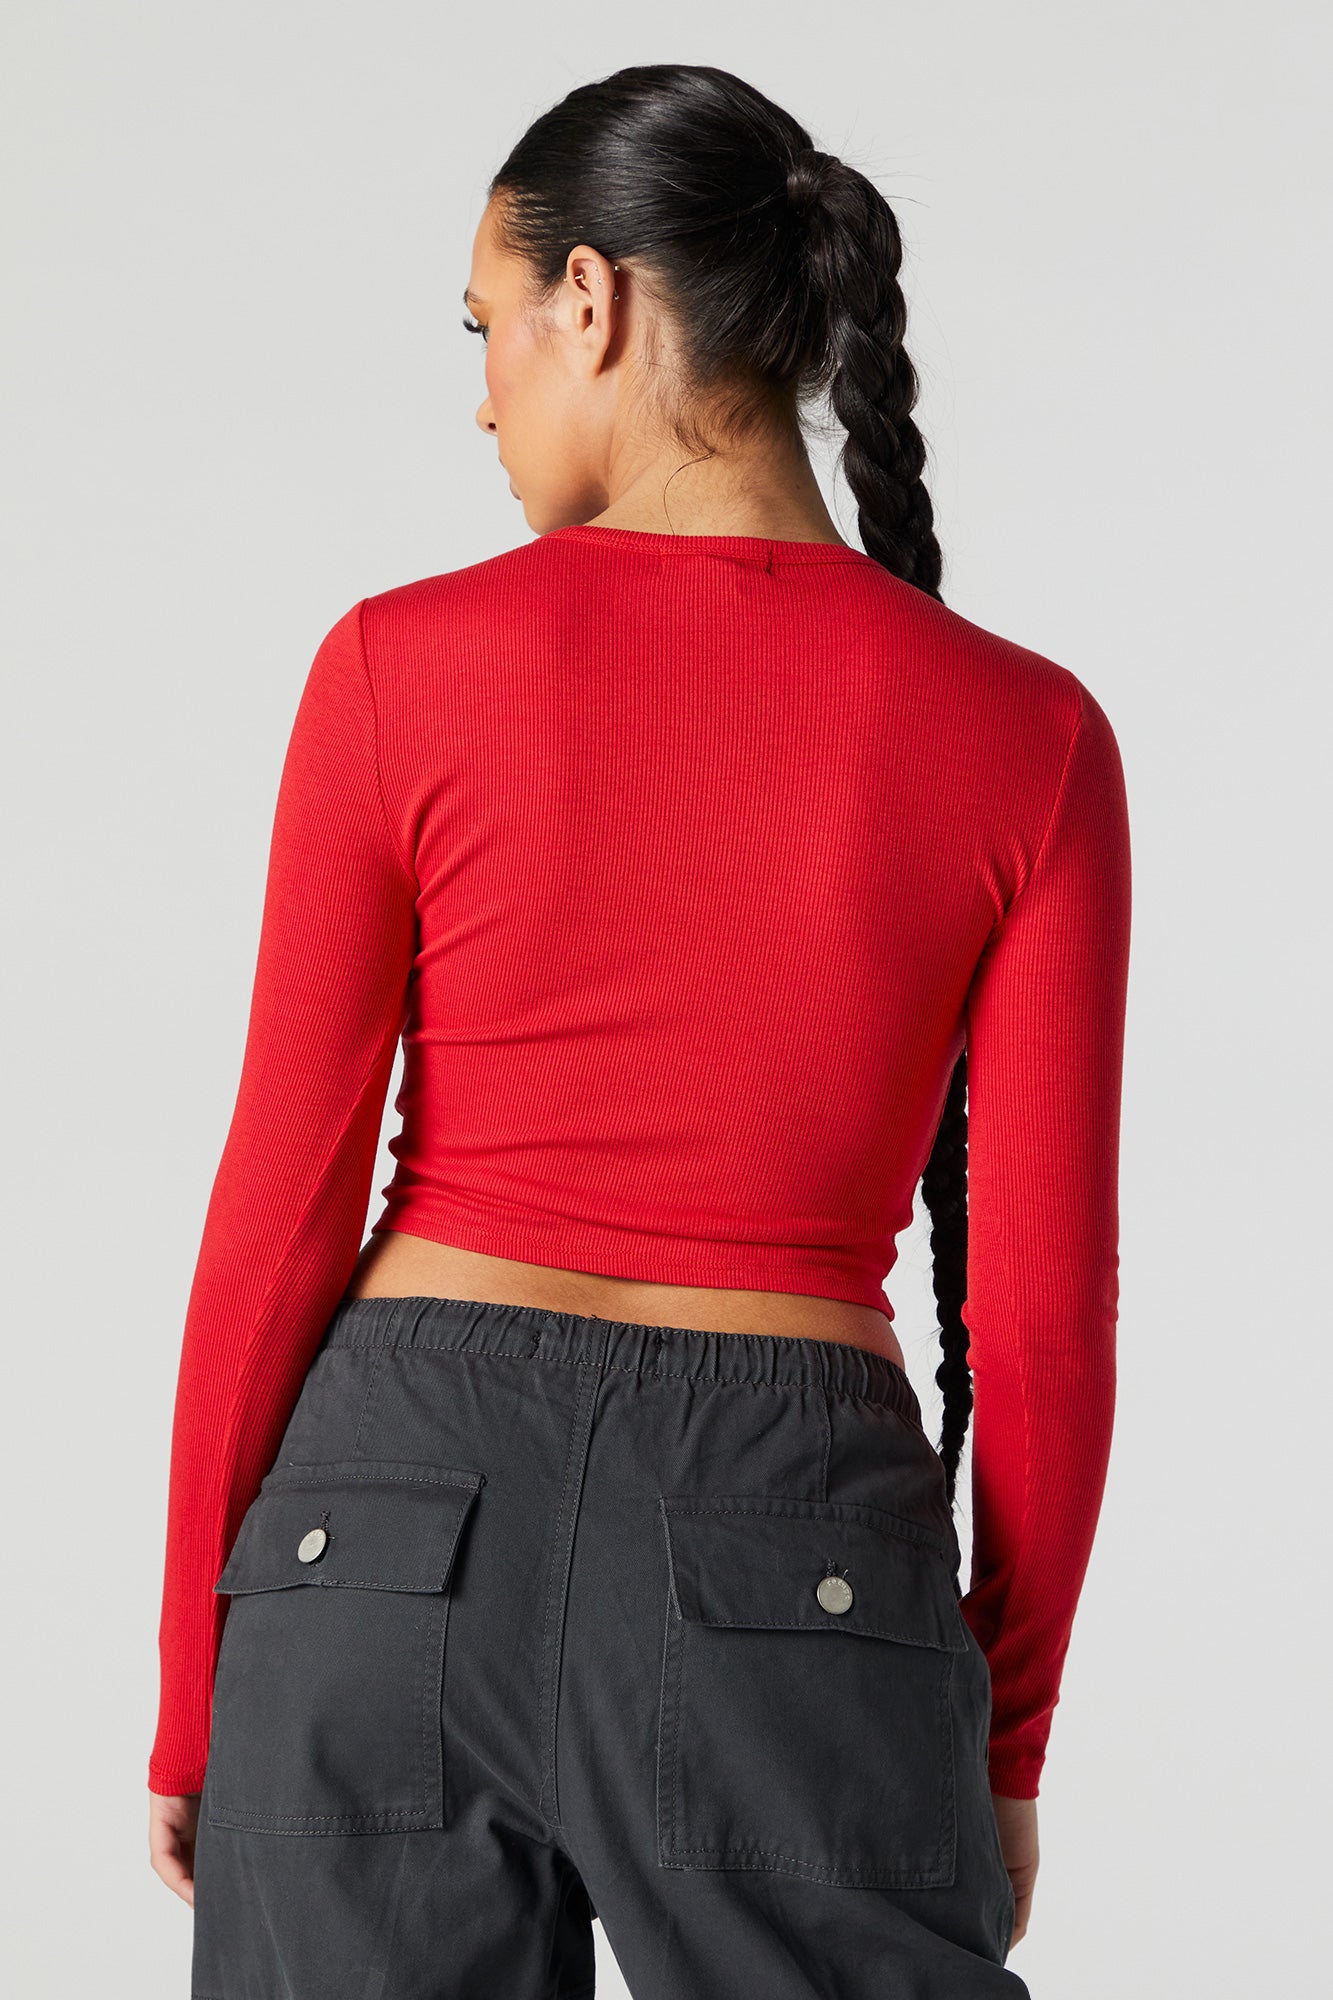 Chicago Graphic Long Sleeve Crop Top